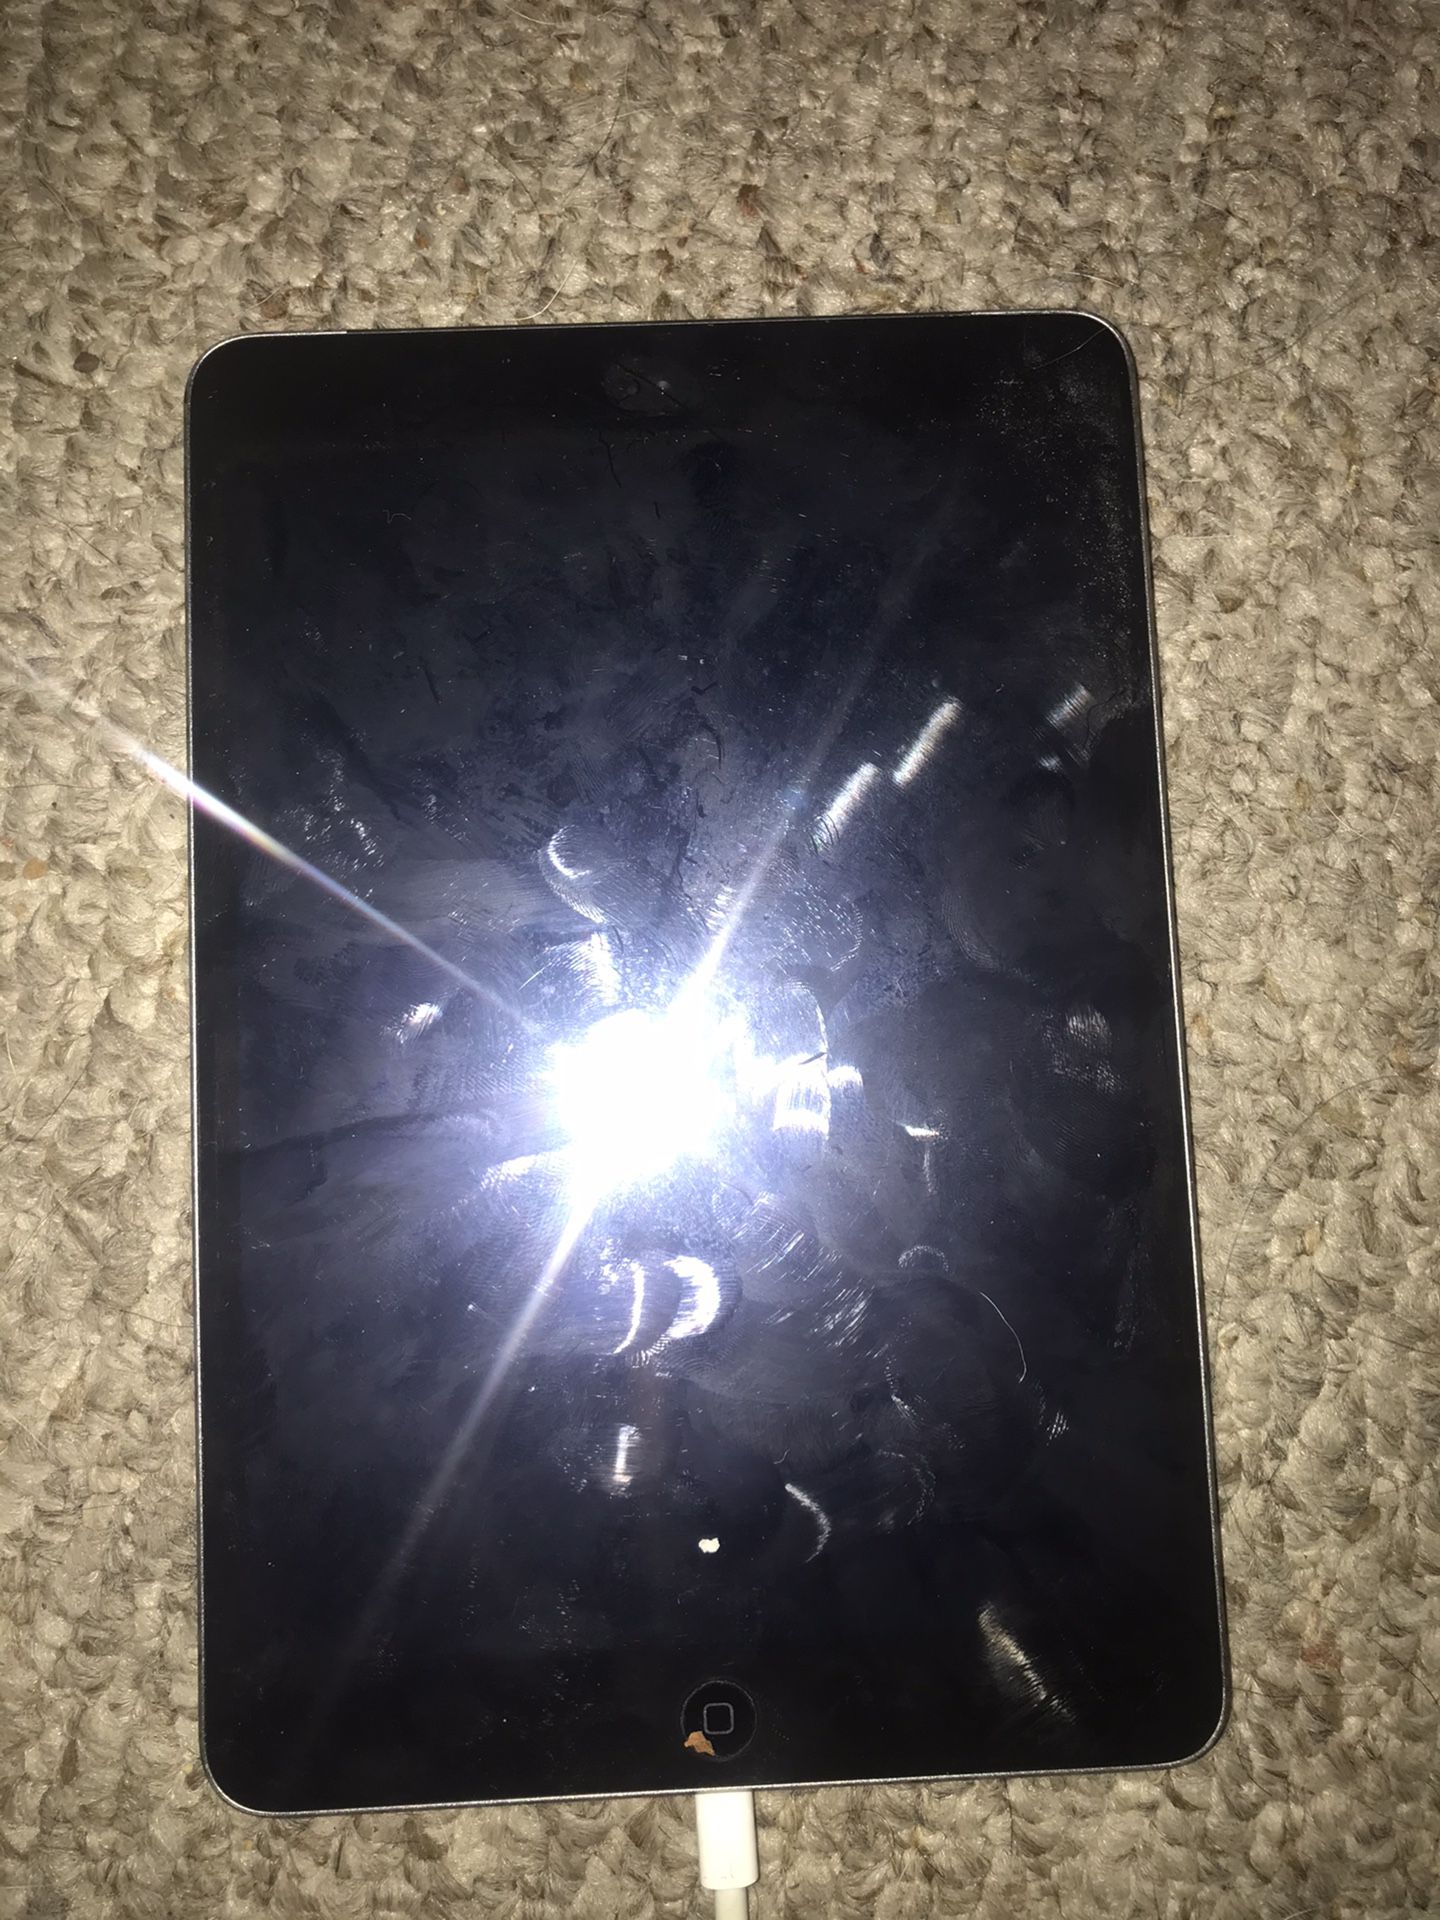 Ipad 150 Or Best offer